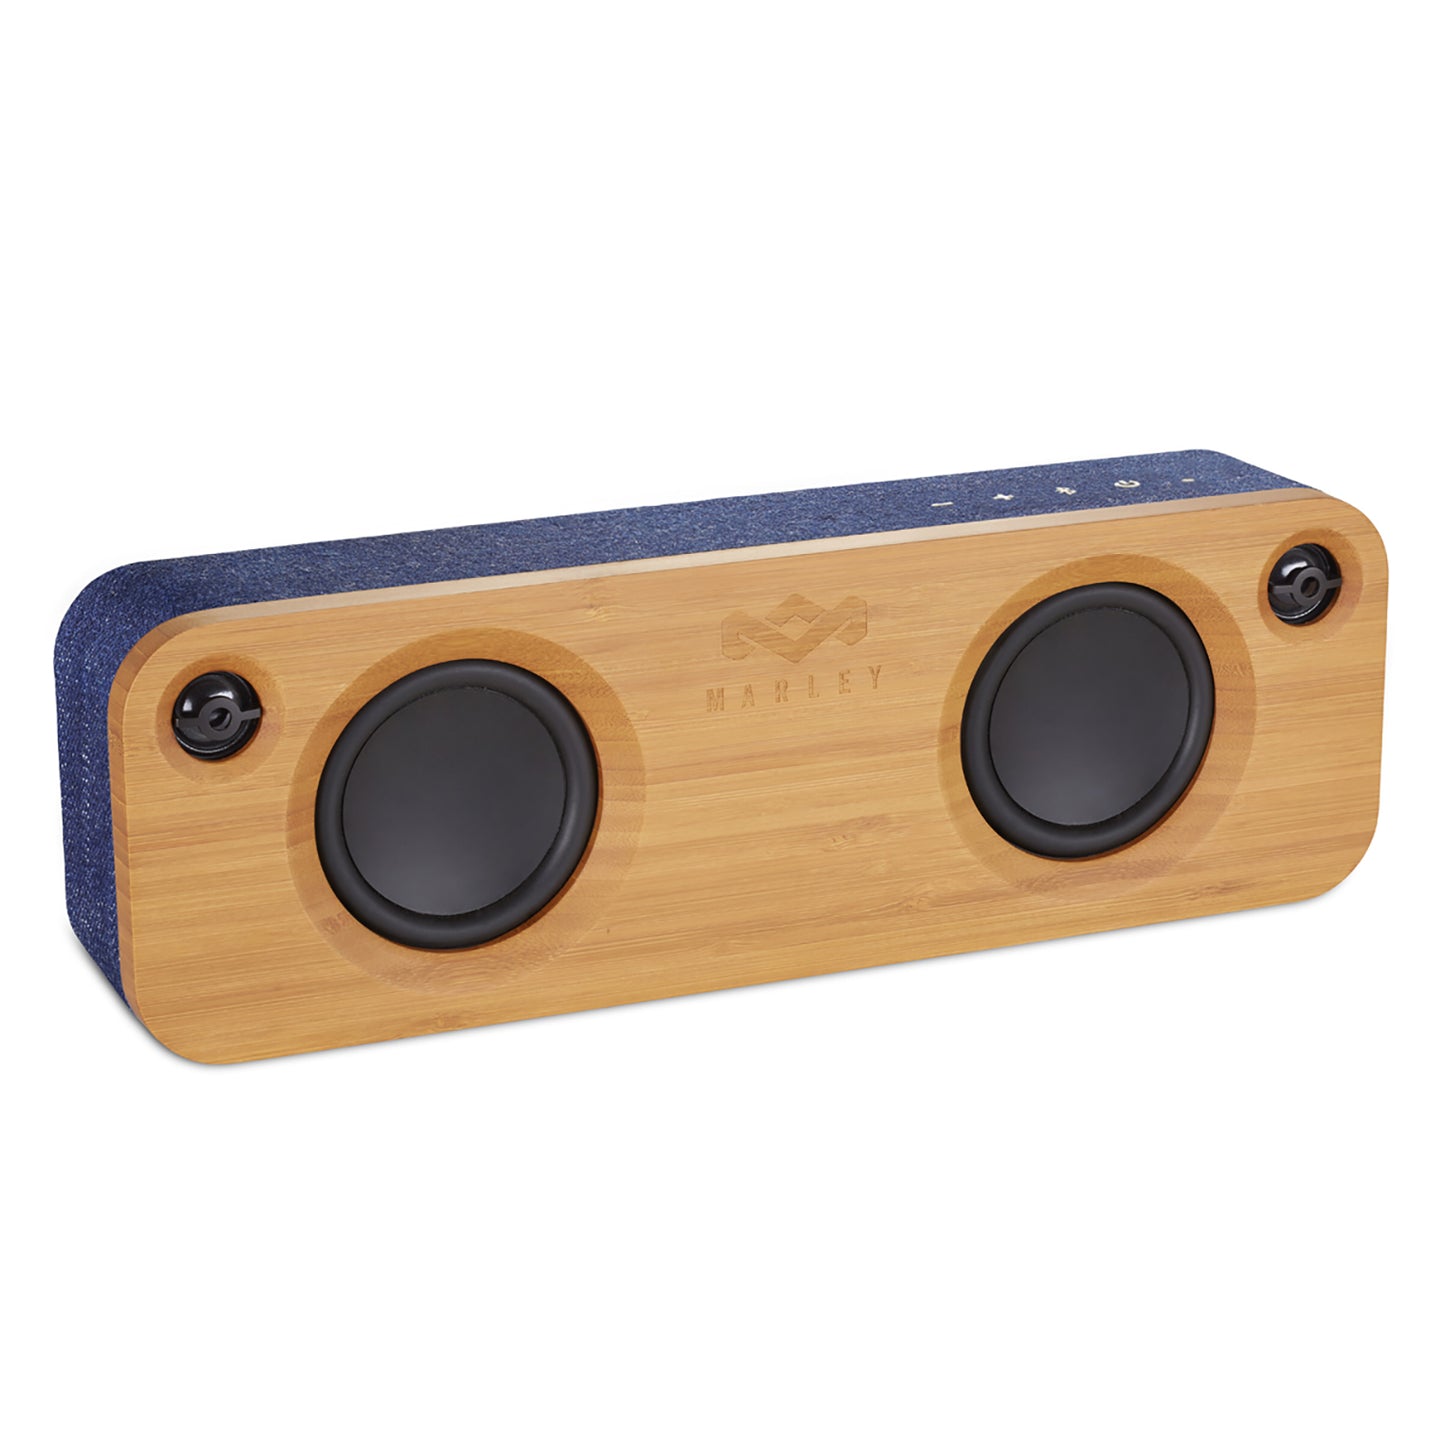 Get Together Bluetooth speaker Denim from House of Marley - enjoy crystal clear sound and a stylish design